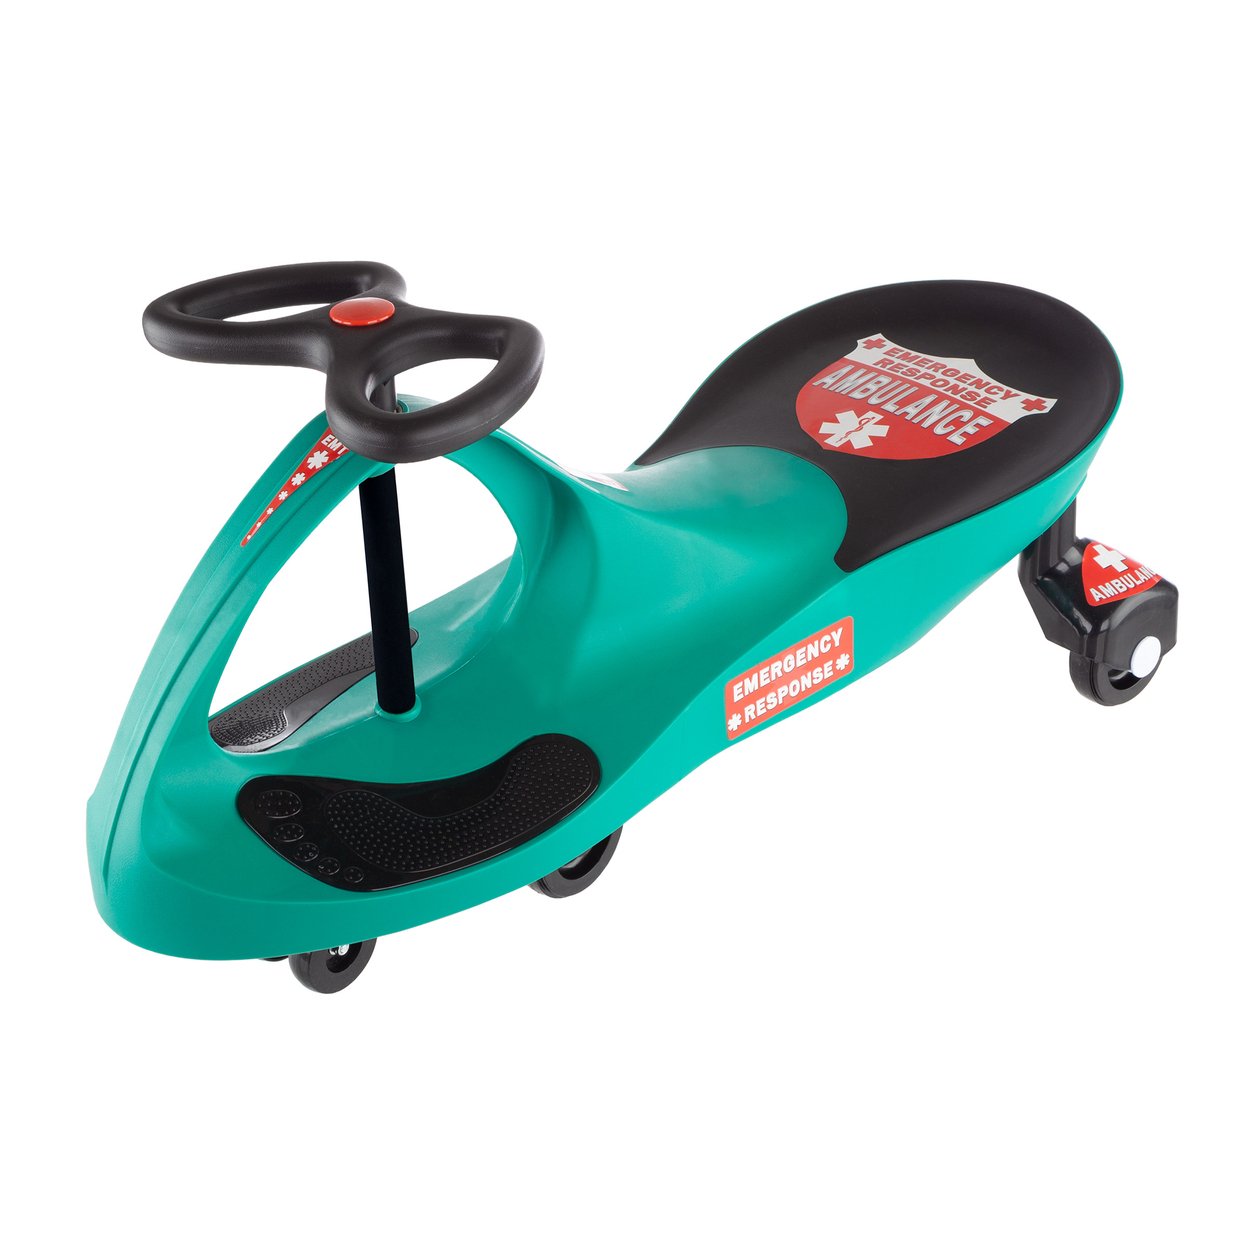 Lil' Rider Ambulance Wiggle Car Toy 3yrs and Up ZigZag Twist Wiggle Go No Batteries, Green